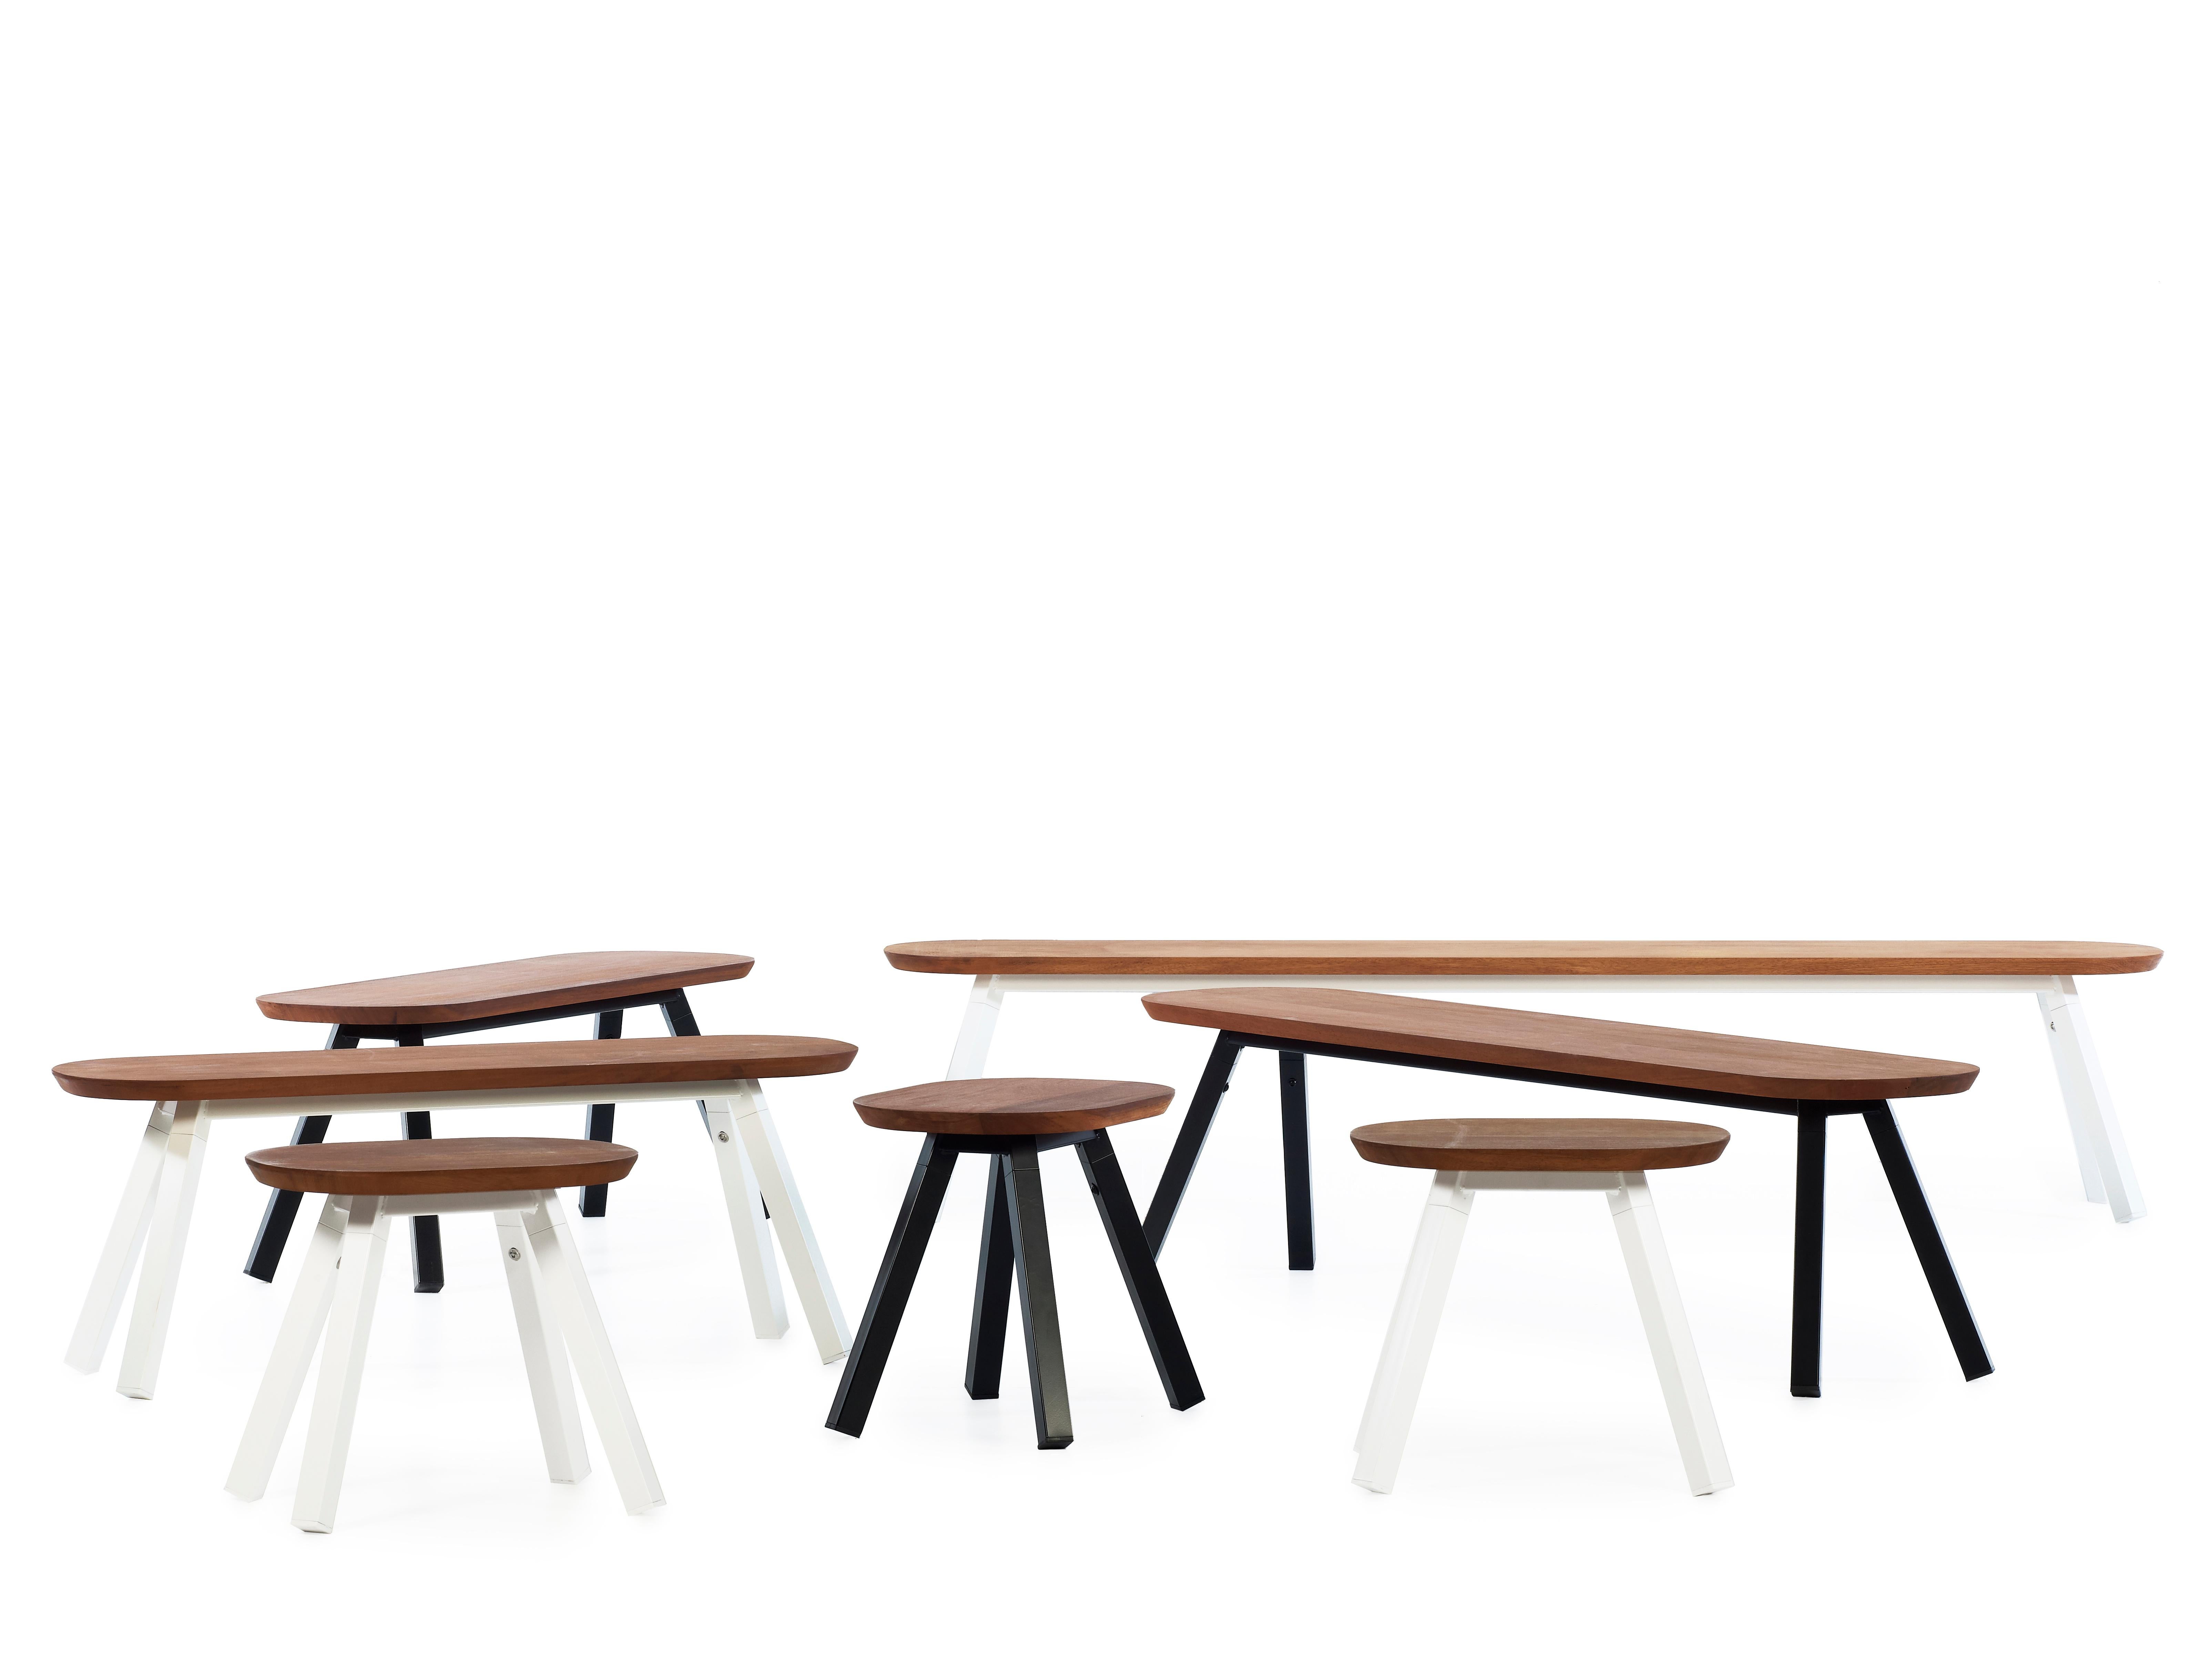 Steel RS Barcelona You & Me Stool in Iroko and White by A.P.O. For Sale